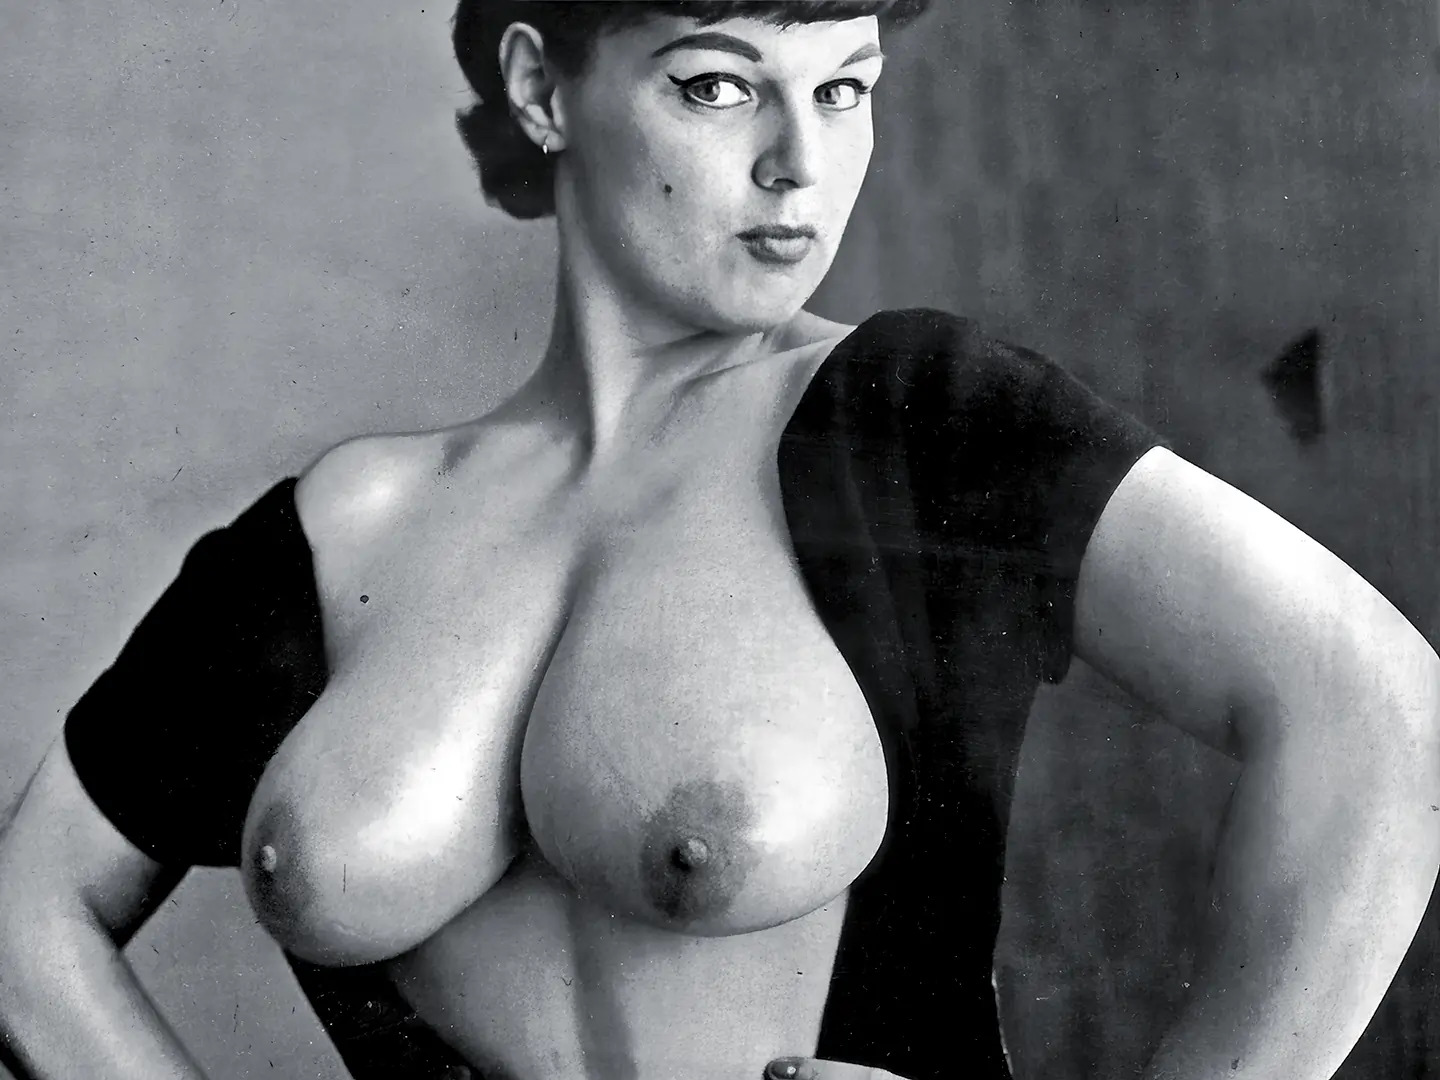 Vintage topless porn videos with lorraine burnett portraying her big and beautiful tits with hard nipples without a bra